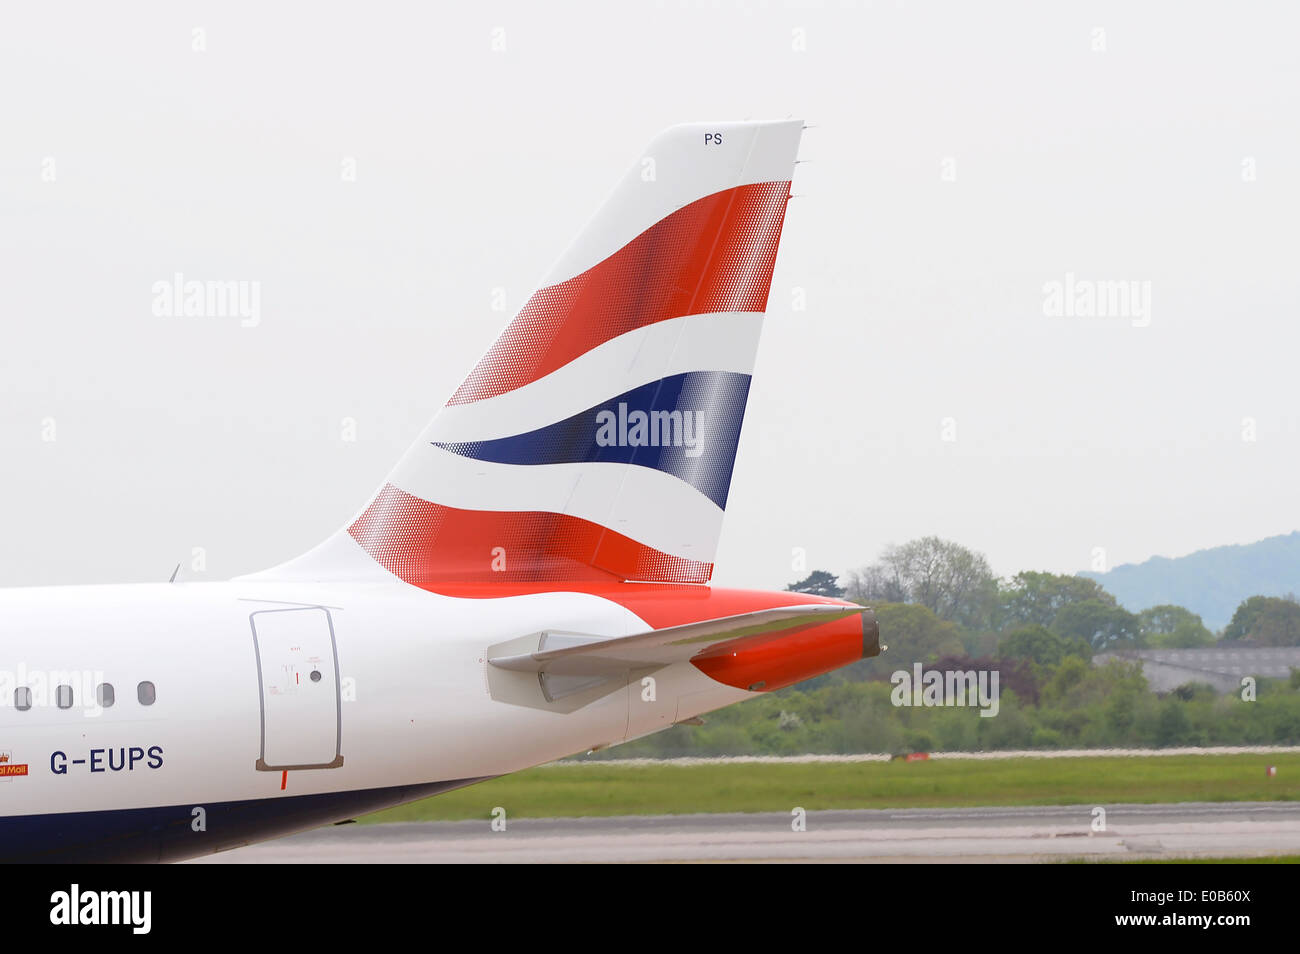 A British, Airways, Airbus, A319 (G-EUPS) taxiing on the runway at Manchester Airport Stock Photo